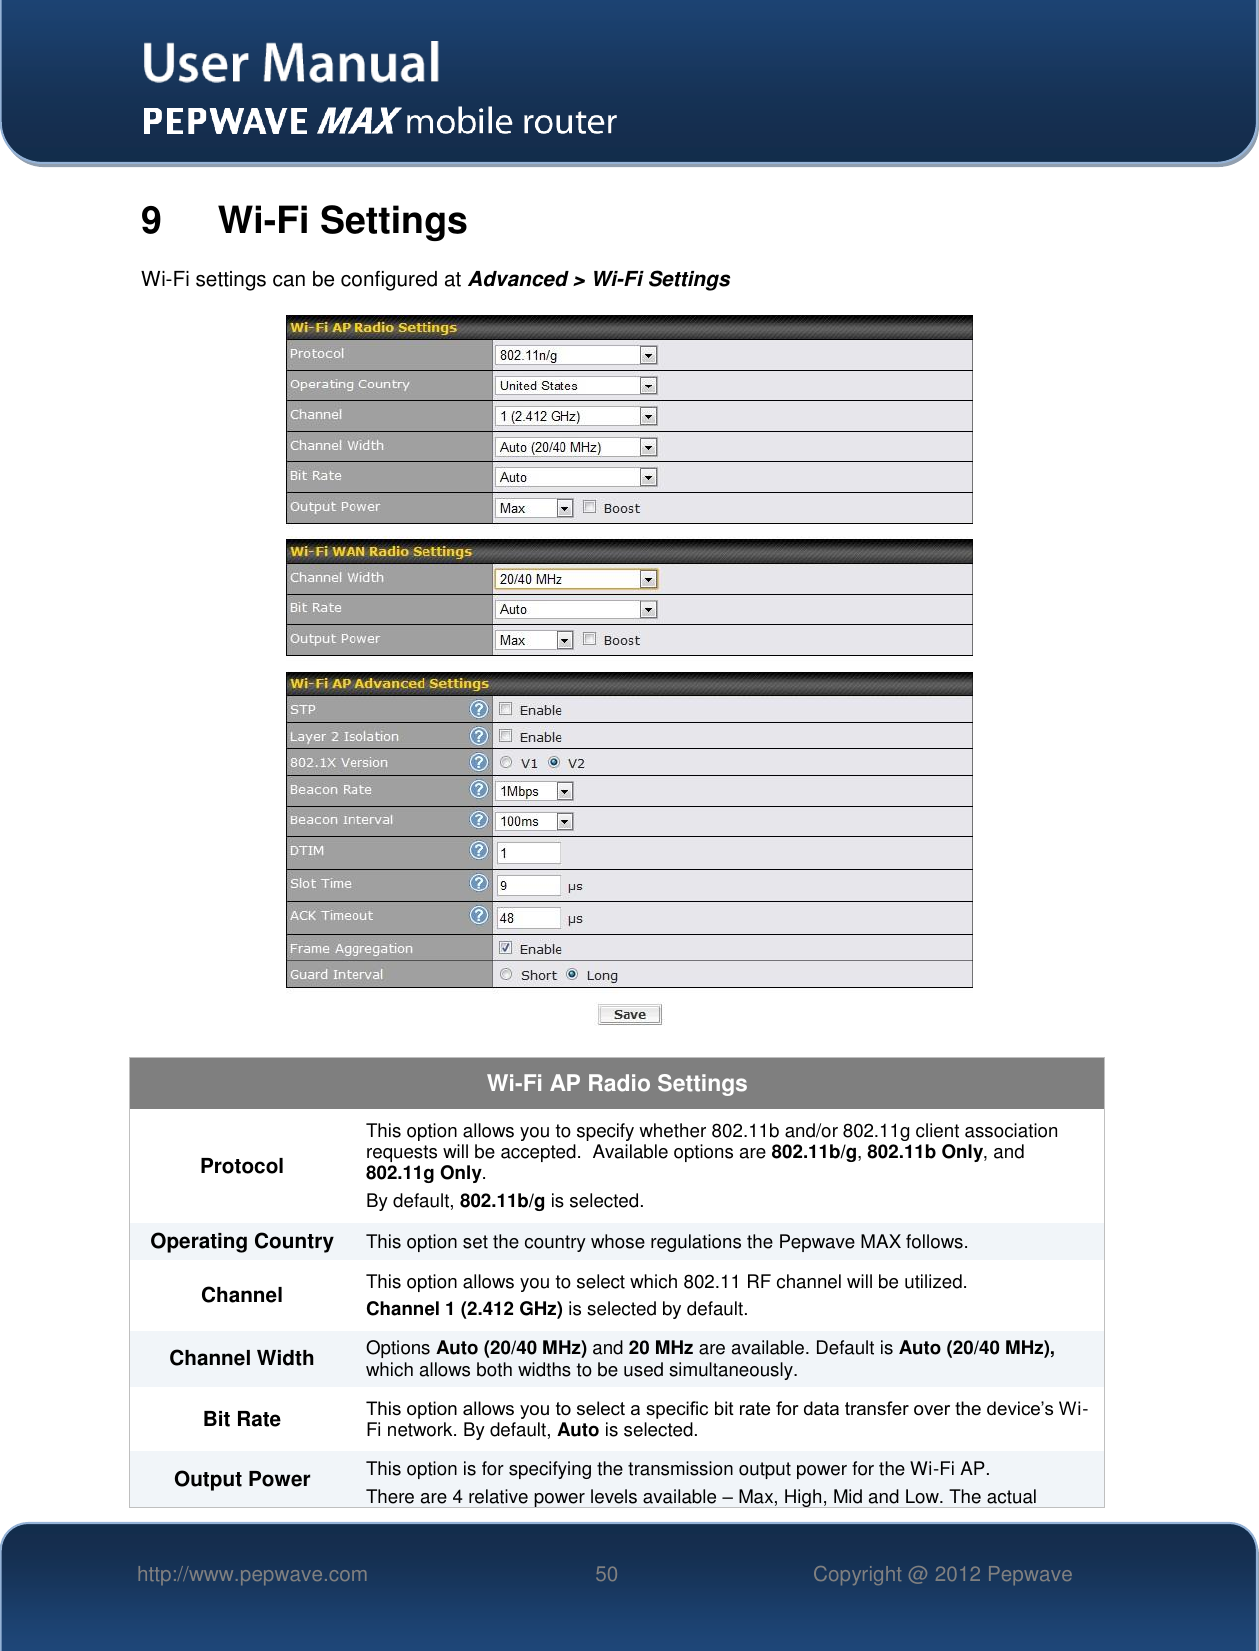   http://www.pepwave.com 50 Copyright @ 2012 Pepwave   9  Wi-Fi Settings Wi-Fi settings can be configured at Advanced &gt; Wi-Fi Settings  Wi-Fi AP Radio Settings Protocol This option allows you to specify whether 802.11b and/or 802.11g client association requests will be accepted.  Available options are 802.11b/g, 802.11b Only, and 802.11g Only.  By default, 802.11b/g is selected.  Operating Country This option set the country whose regulations the Pepwave MAX follows.  Channel This option allows you to select which 802.11 RF channel will be utilized. Channel 1 (2.412 GHz) is selected by default.  Channel Width Options Auto (20/40 MHz) and 20 MHz are available. Default is Auto (20/40 MHz), which allows both widths to be used simultaneously.  Bit Rate This option allows you to select a specific bit rate for data transfer over the device’s Wi-Fi network. By default, Auto is selected. Output Power This option is for specifying the transmission output power for the Wi-Fi AP. There are 4 relative power levels available – Max, High, Mid and Low. The actual 